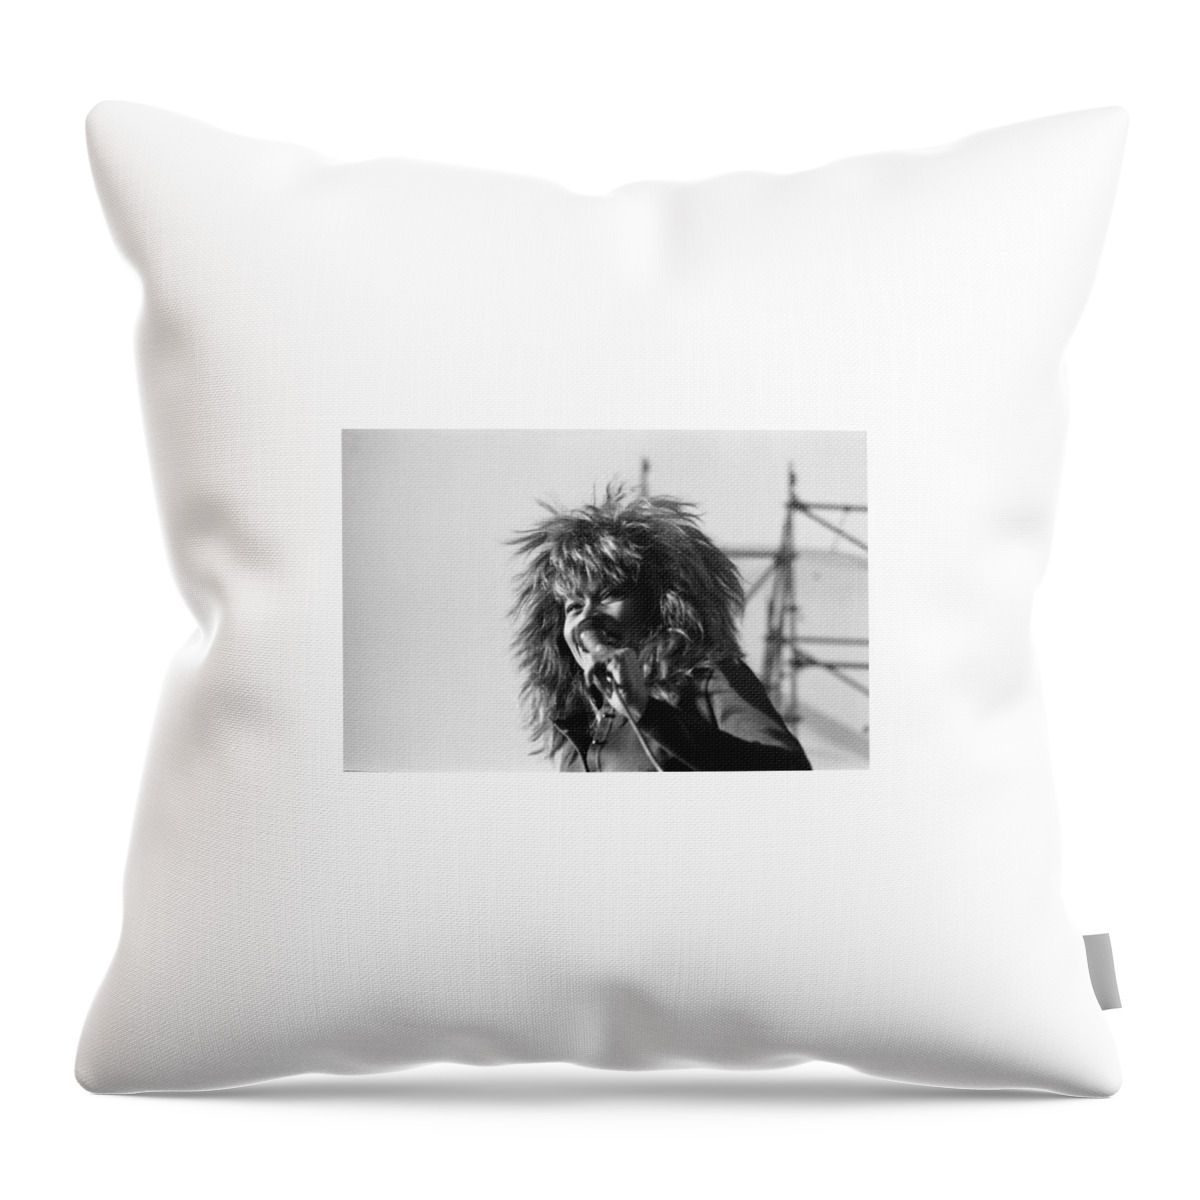 1980s Throw Pillow featuring the photograph Tina Turner at the R.D.S. arena by Irishphotoarchive